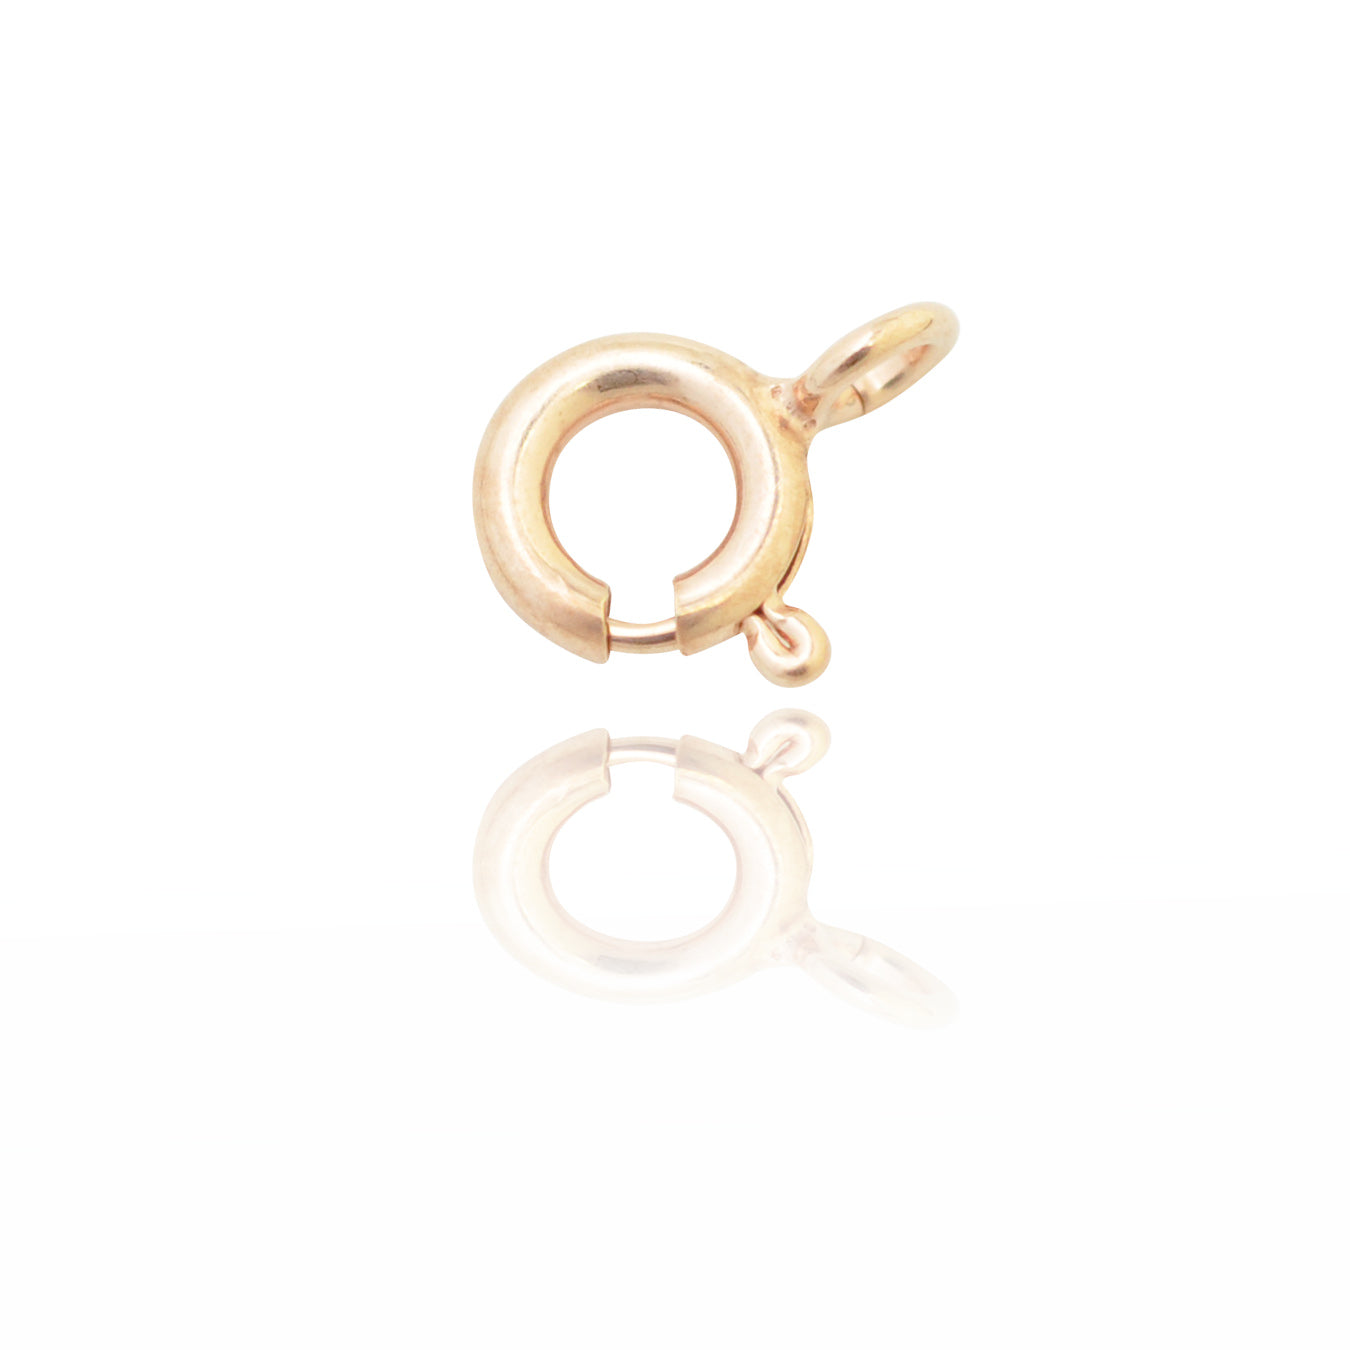 Spring ring clasp / 925 silver rose gold plated / Ø 6 mm